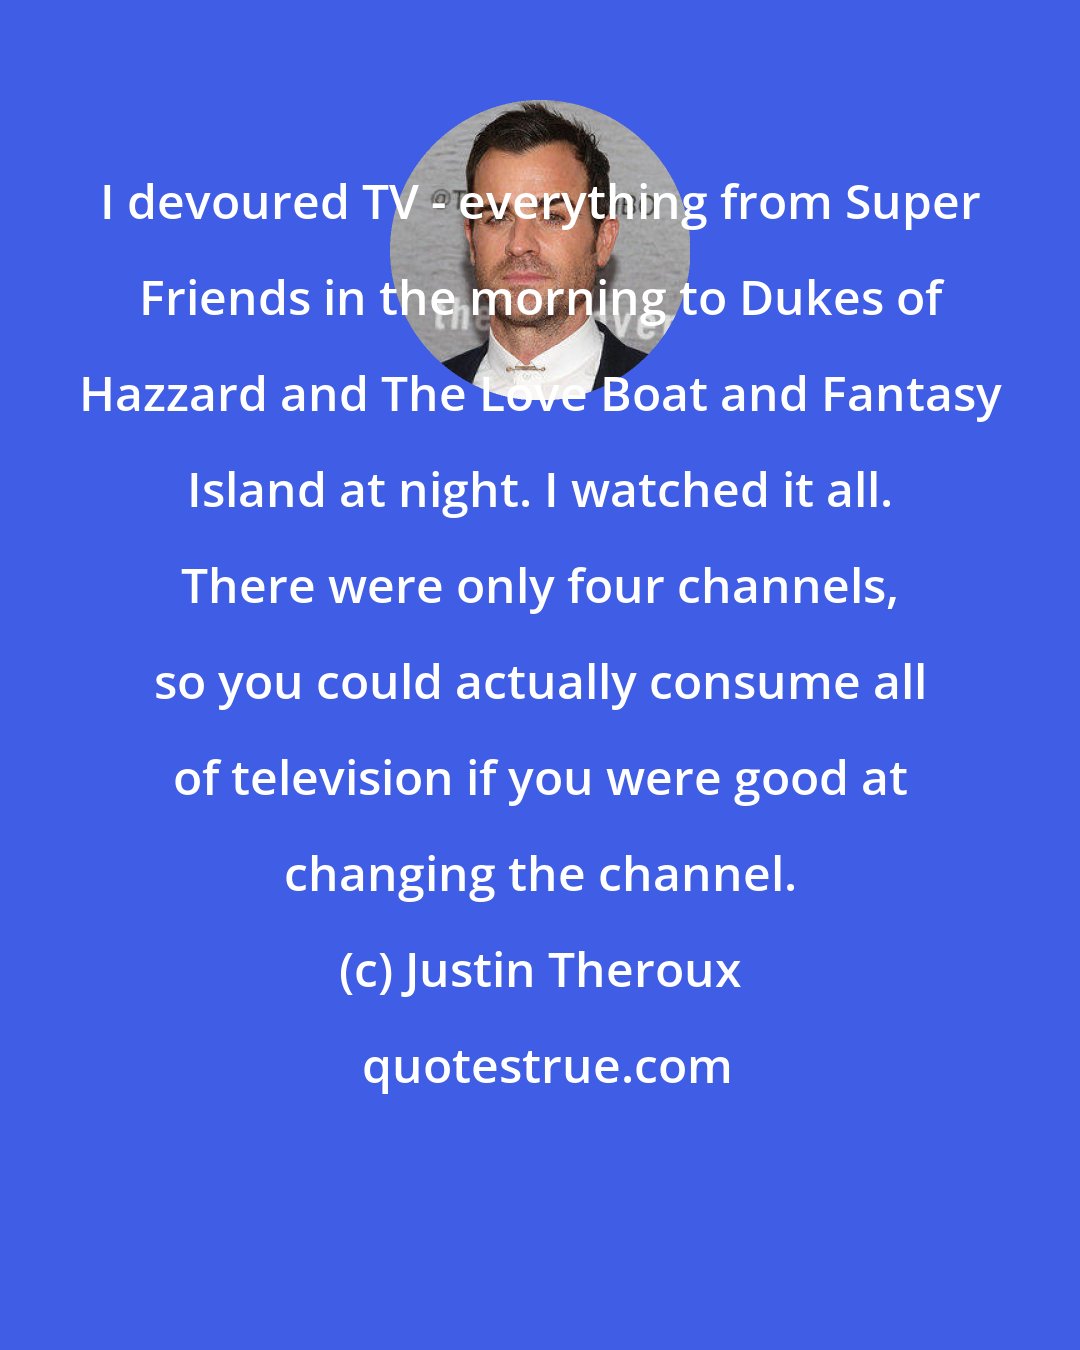 Justin Theroux: I devoured TV - everything from Super Friends in the morning to Dukes of Hazzard and The Love Boat and Fantasy Island at night. I watched it all. There were only four channels, so you could actually consume all of television if you were good at changing the channel.